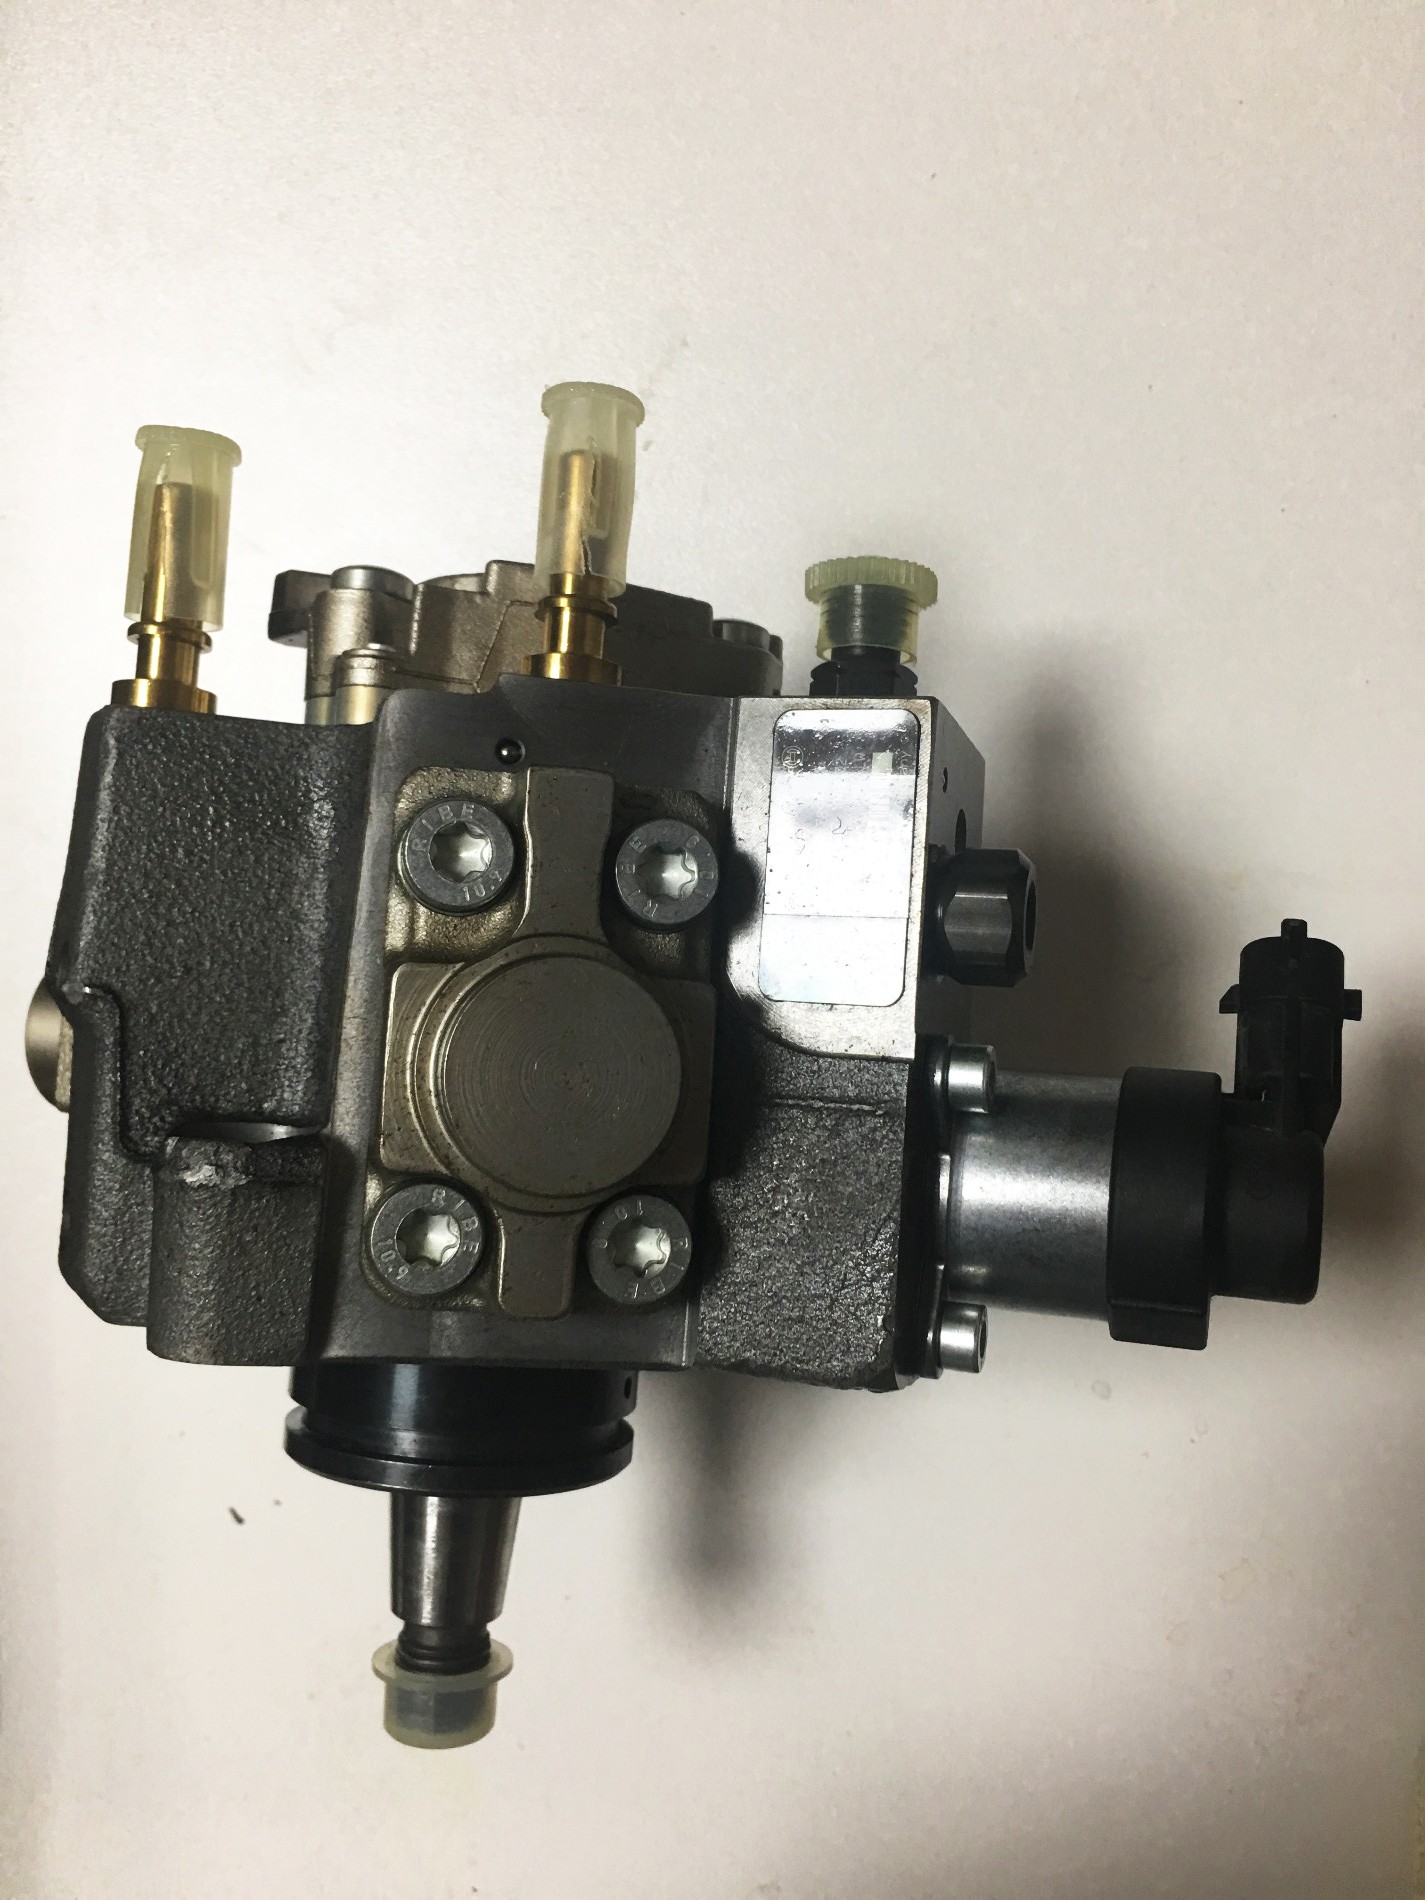 Comprar ISBe ISDe QSB Diesel Fuel Injection Pump 0445020119,ISBe ISDe QSB Diesel Fuel Injection Pump 0445020119 Preço,ISBe ISDe QSB Diesel Fuel Injection Pump 0445020119   Marcas,ISBe ISDe QSB Diesel Fuel Injection Pump 0445020119 Fabricante,ISBe ISDe QSB Diesel Fuel Injection Pump 0445020119 Mercado,ISBe ISDe QSB Diesel Fuel Injection Pump 0445020119 Companhia,